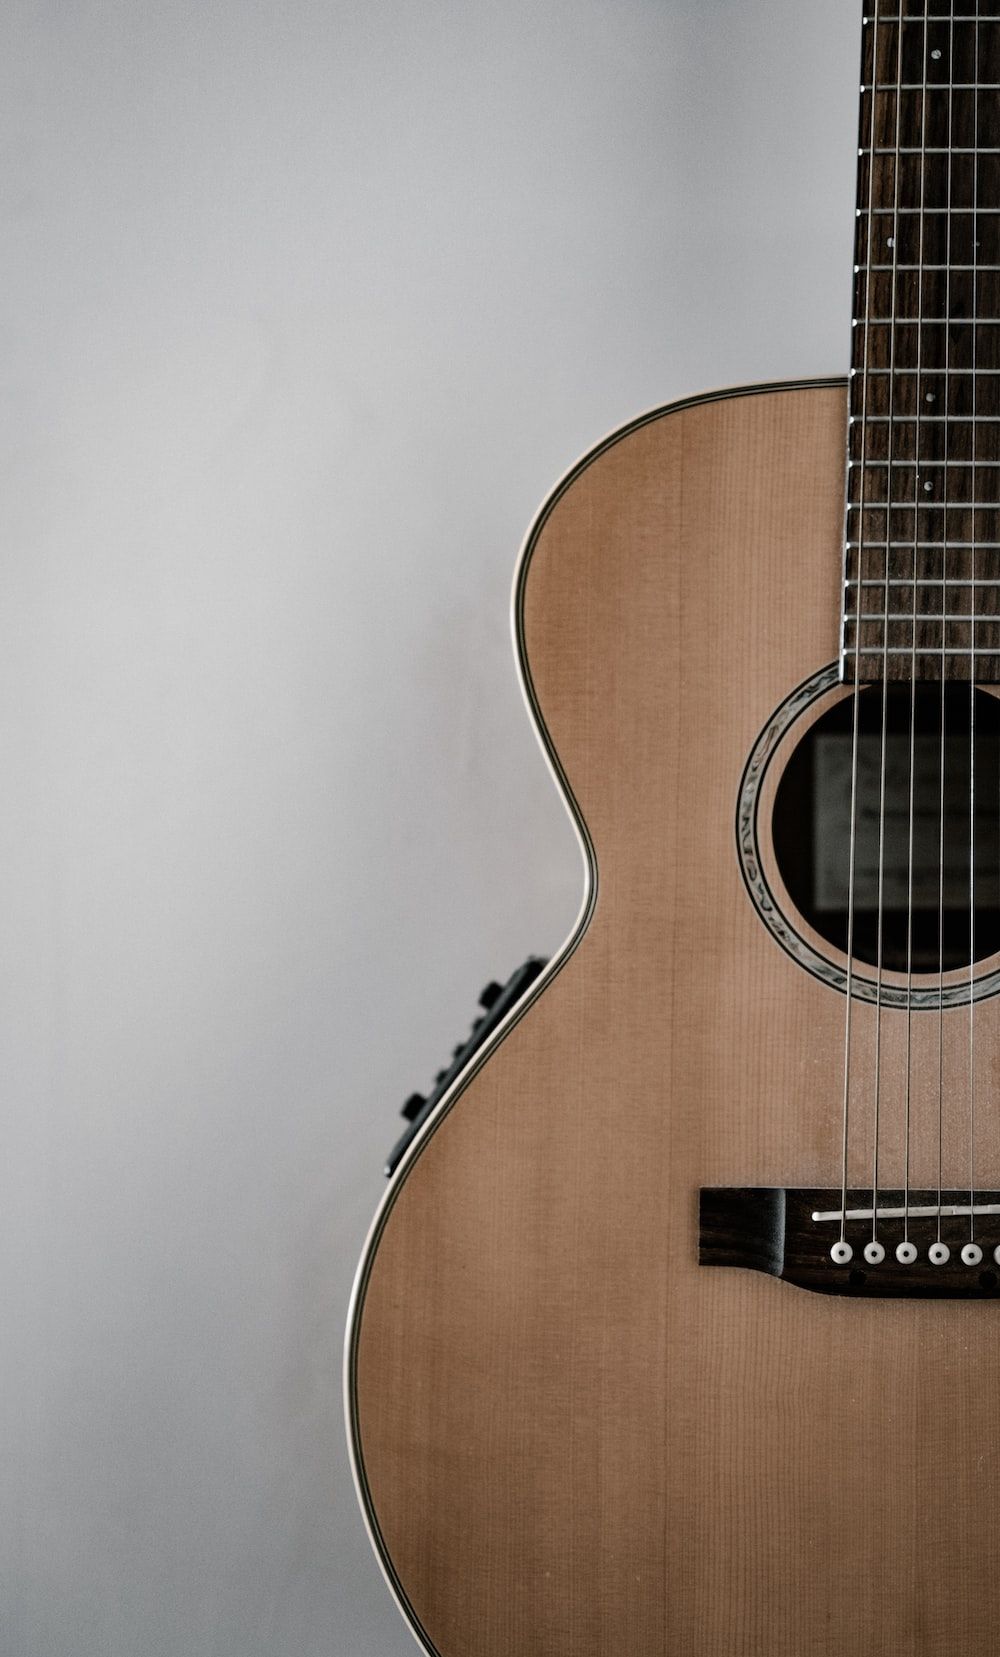 Guitar Acoustic Picture. Download Free Image